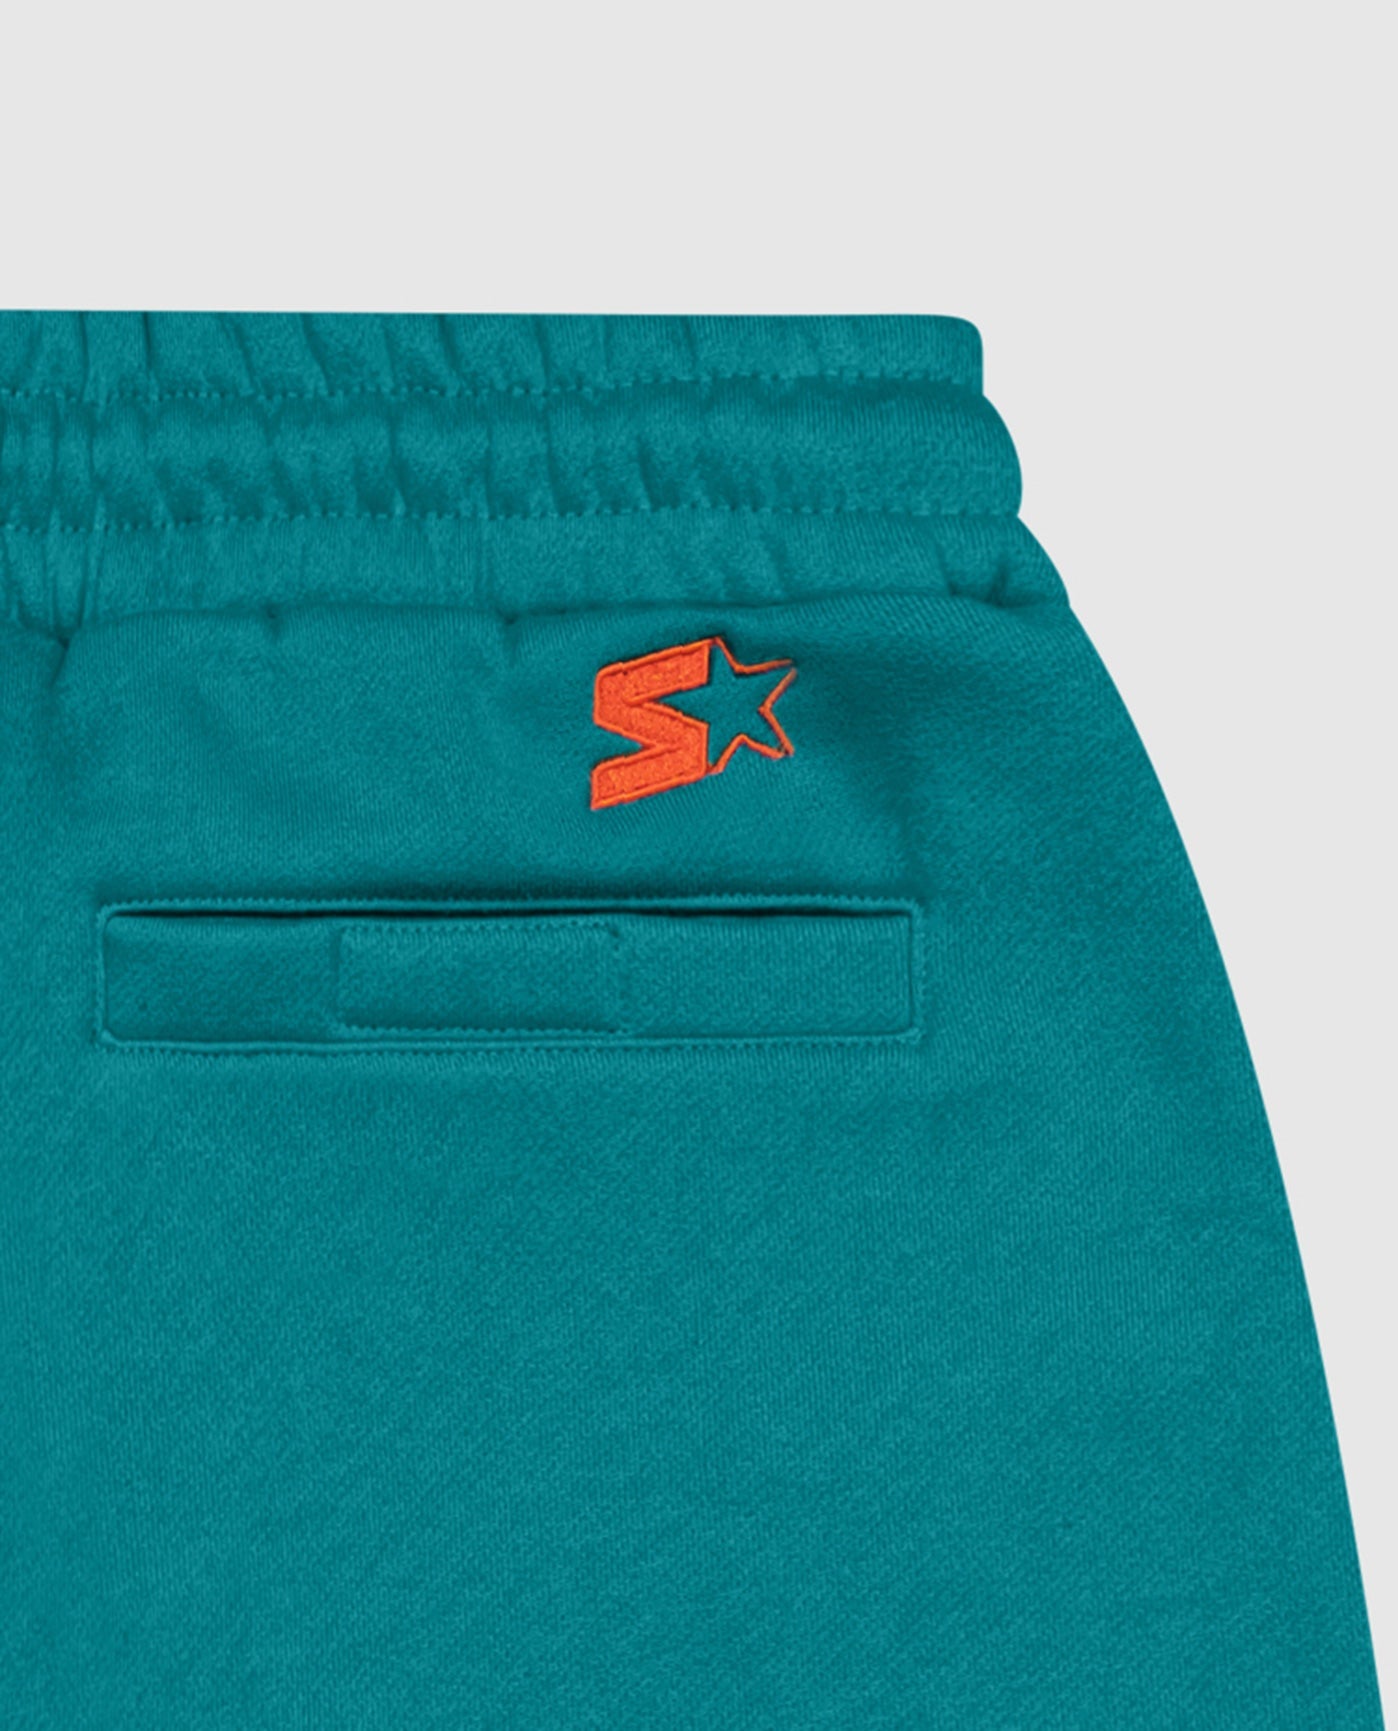 Starter logo below the right waist back graphic | Dolphins Aqua